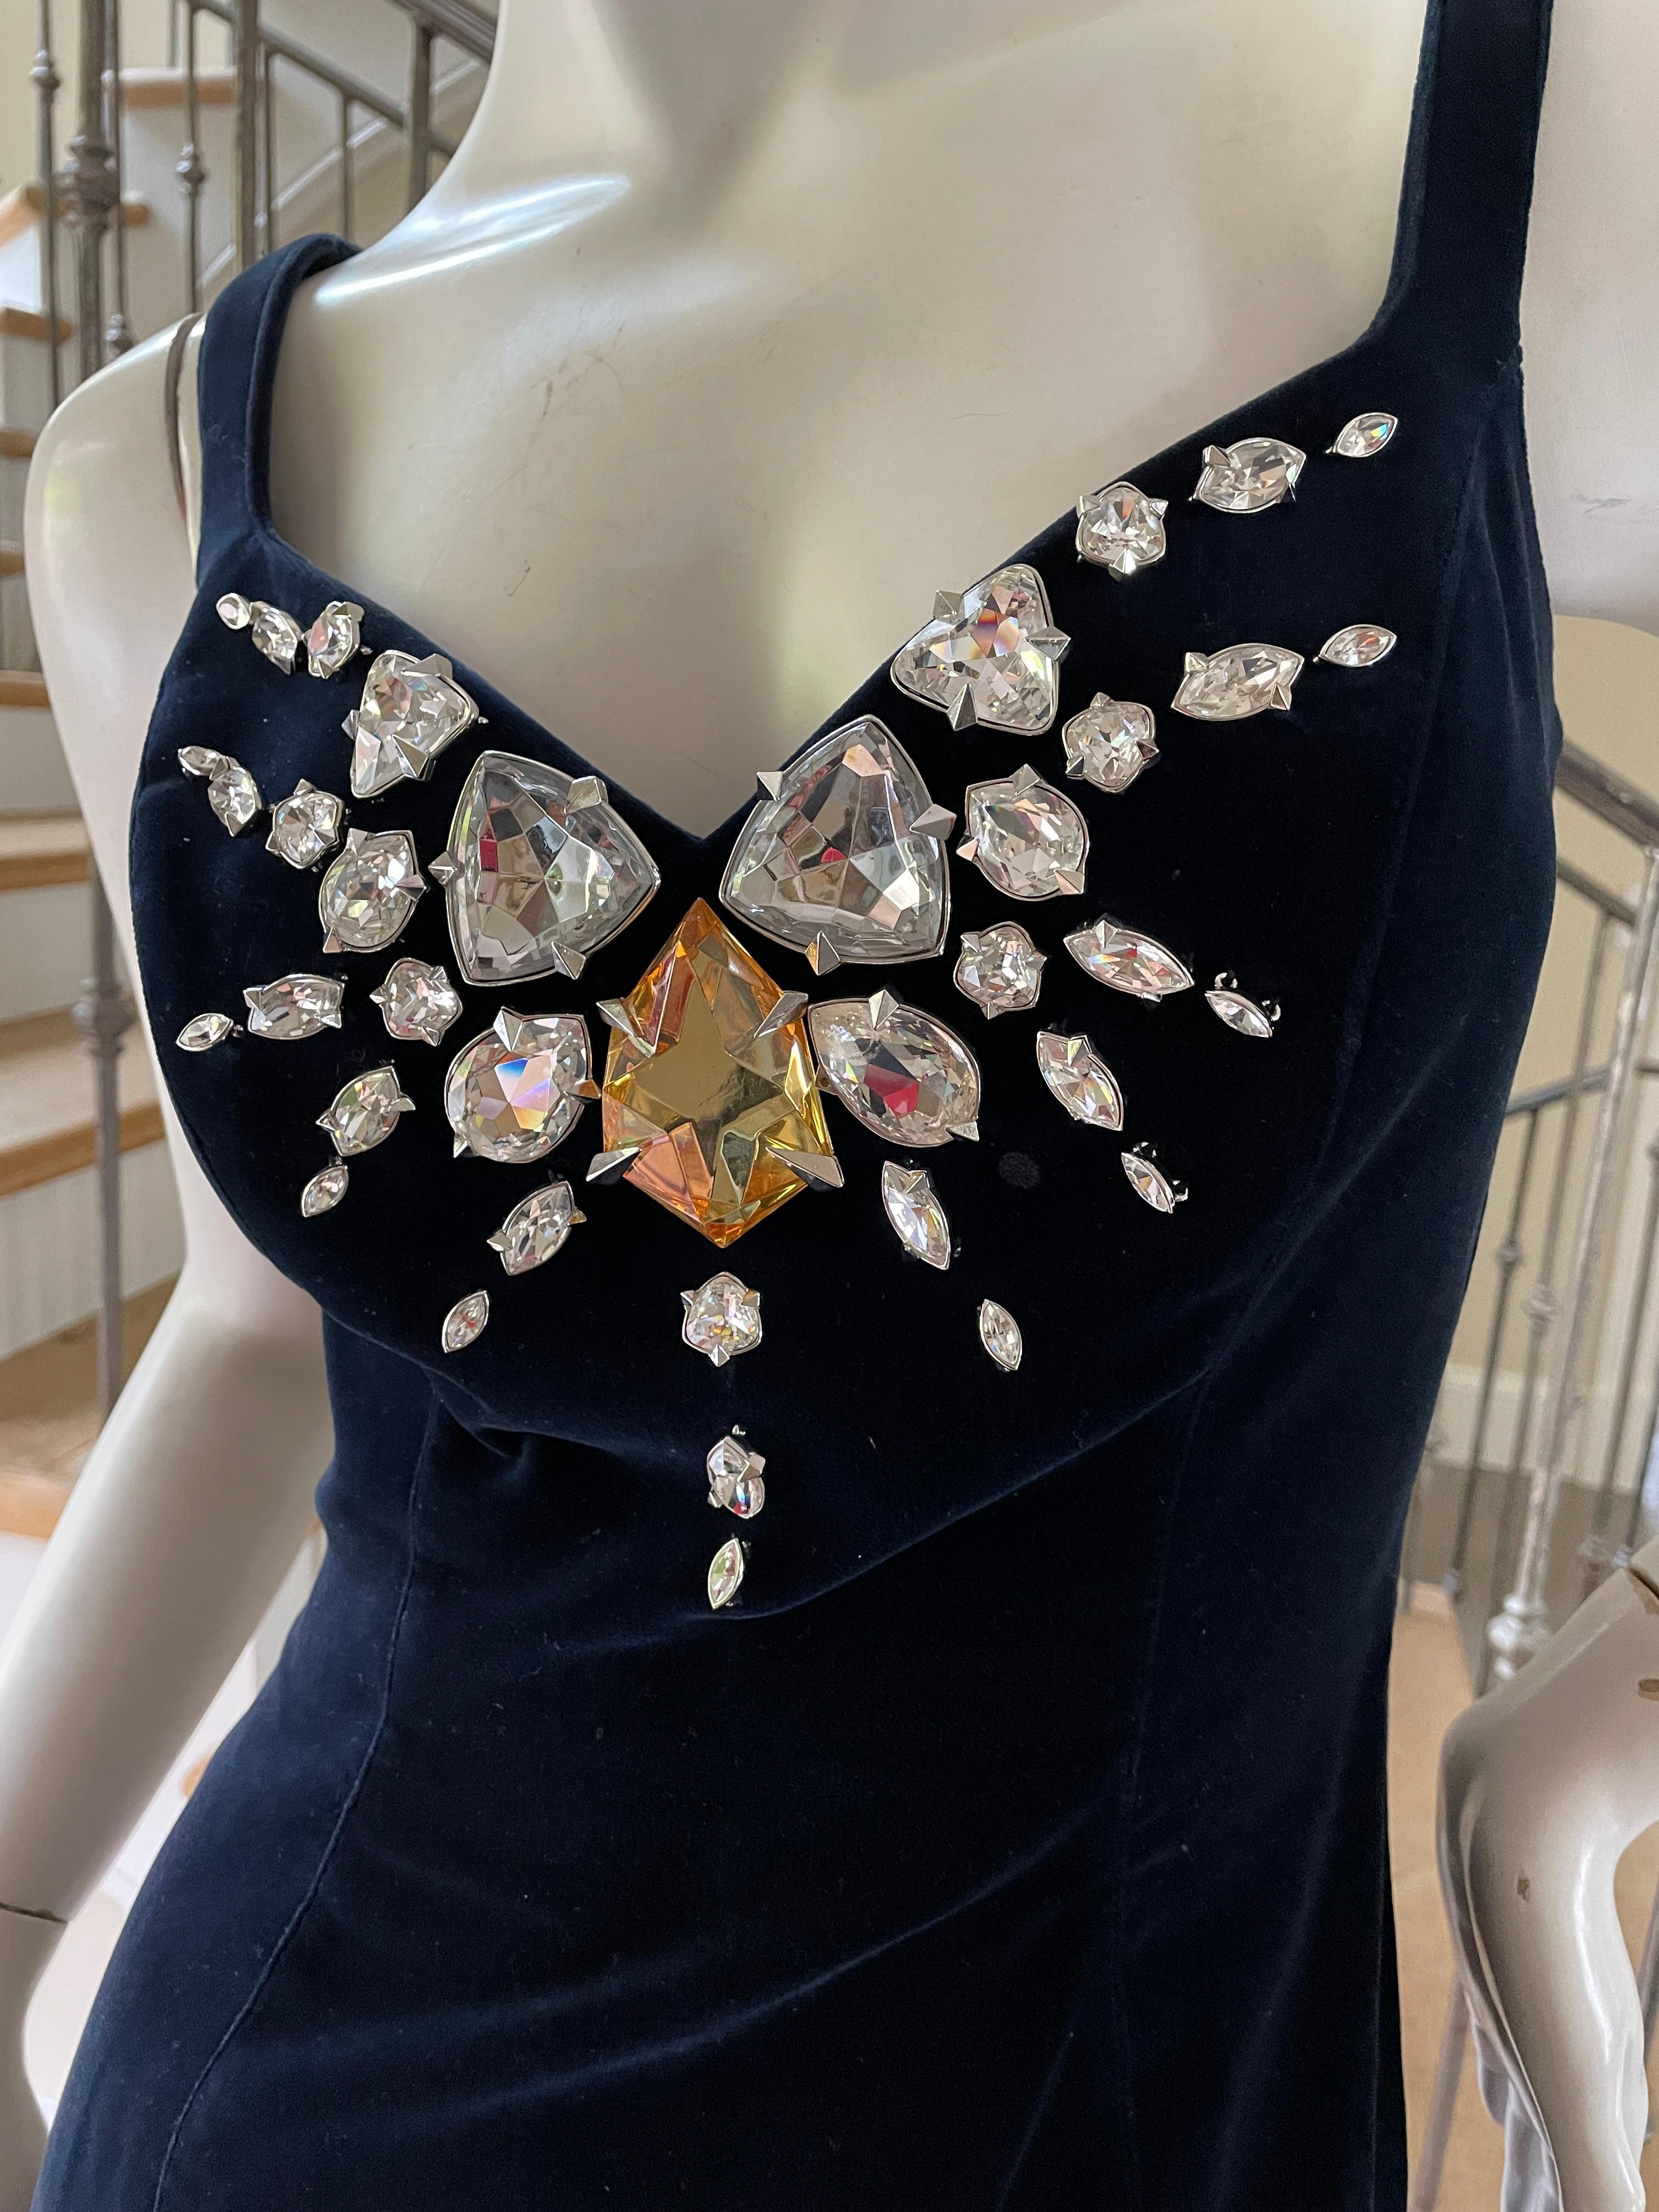 Thierry Mugler Vintage Blue Velvet Evening Dress with Gobsmacking Jewel Details In Good Condition For Sale In Cloverdale, CA